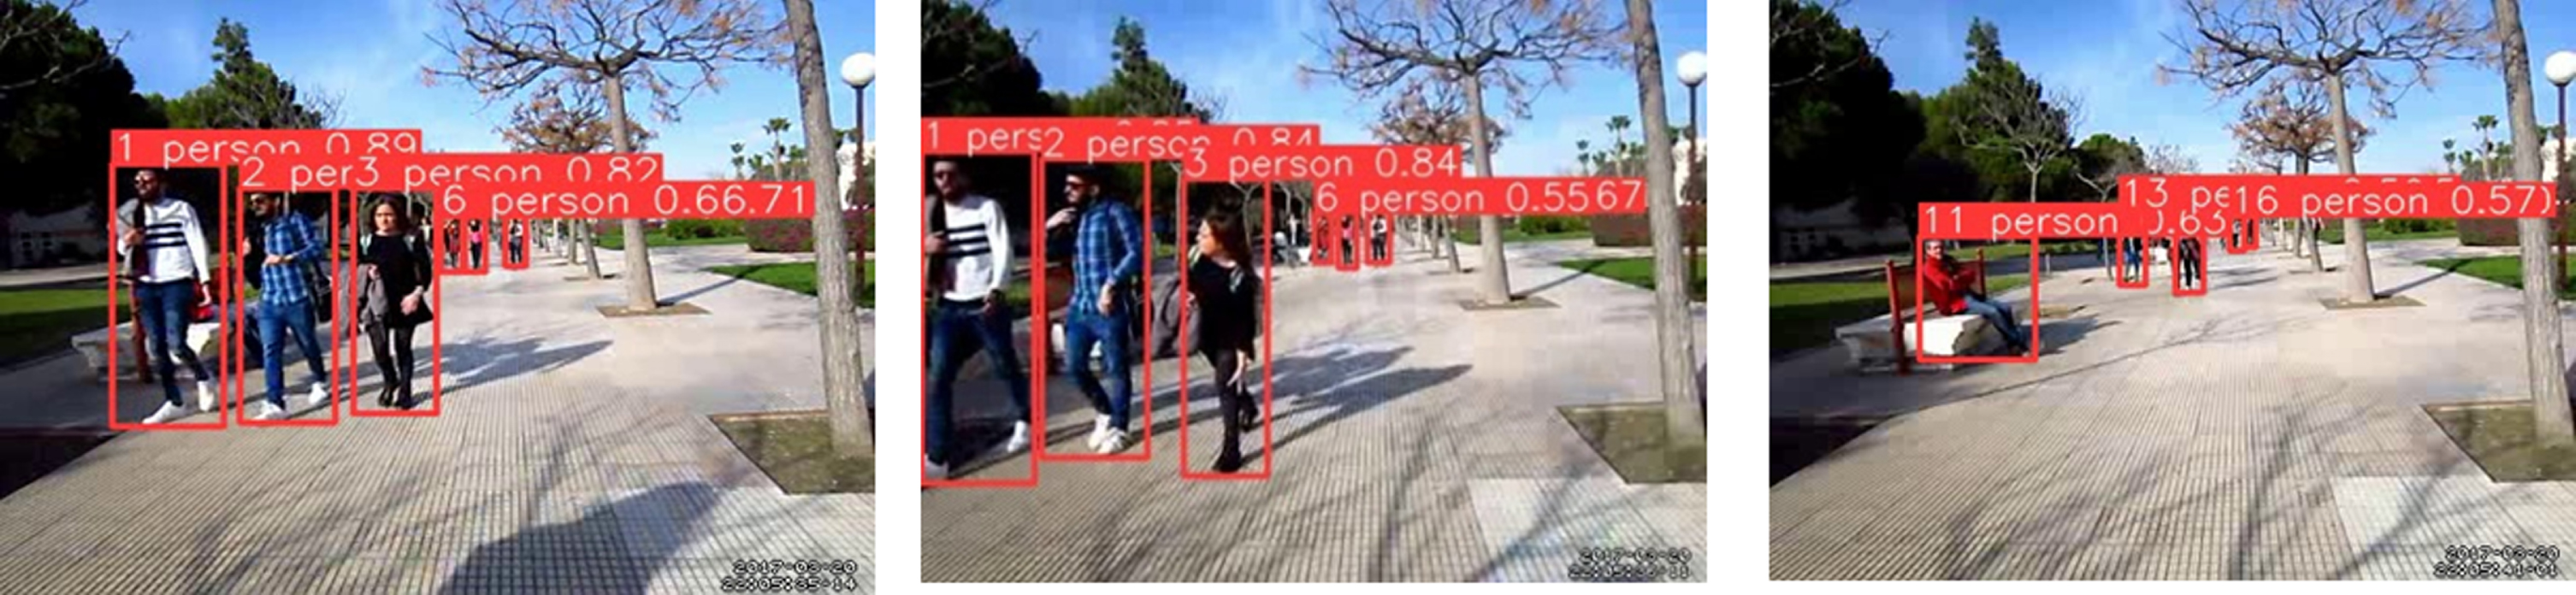 Results of pedestrian detection using YOLOv5 on three frames taken from the video dataset.